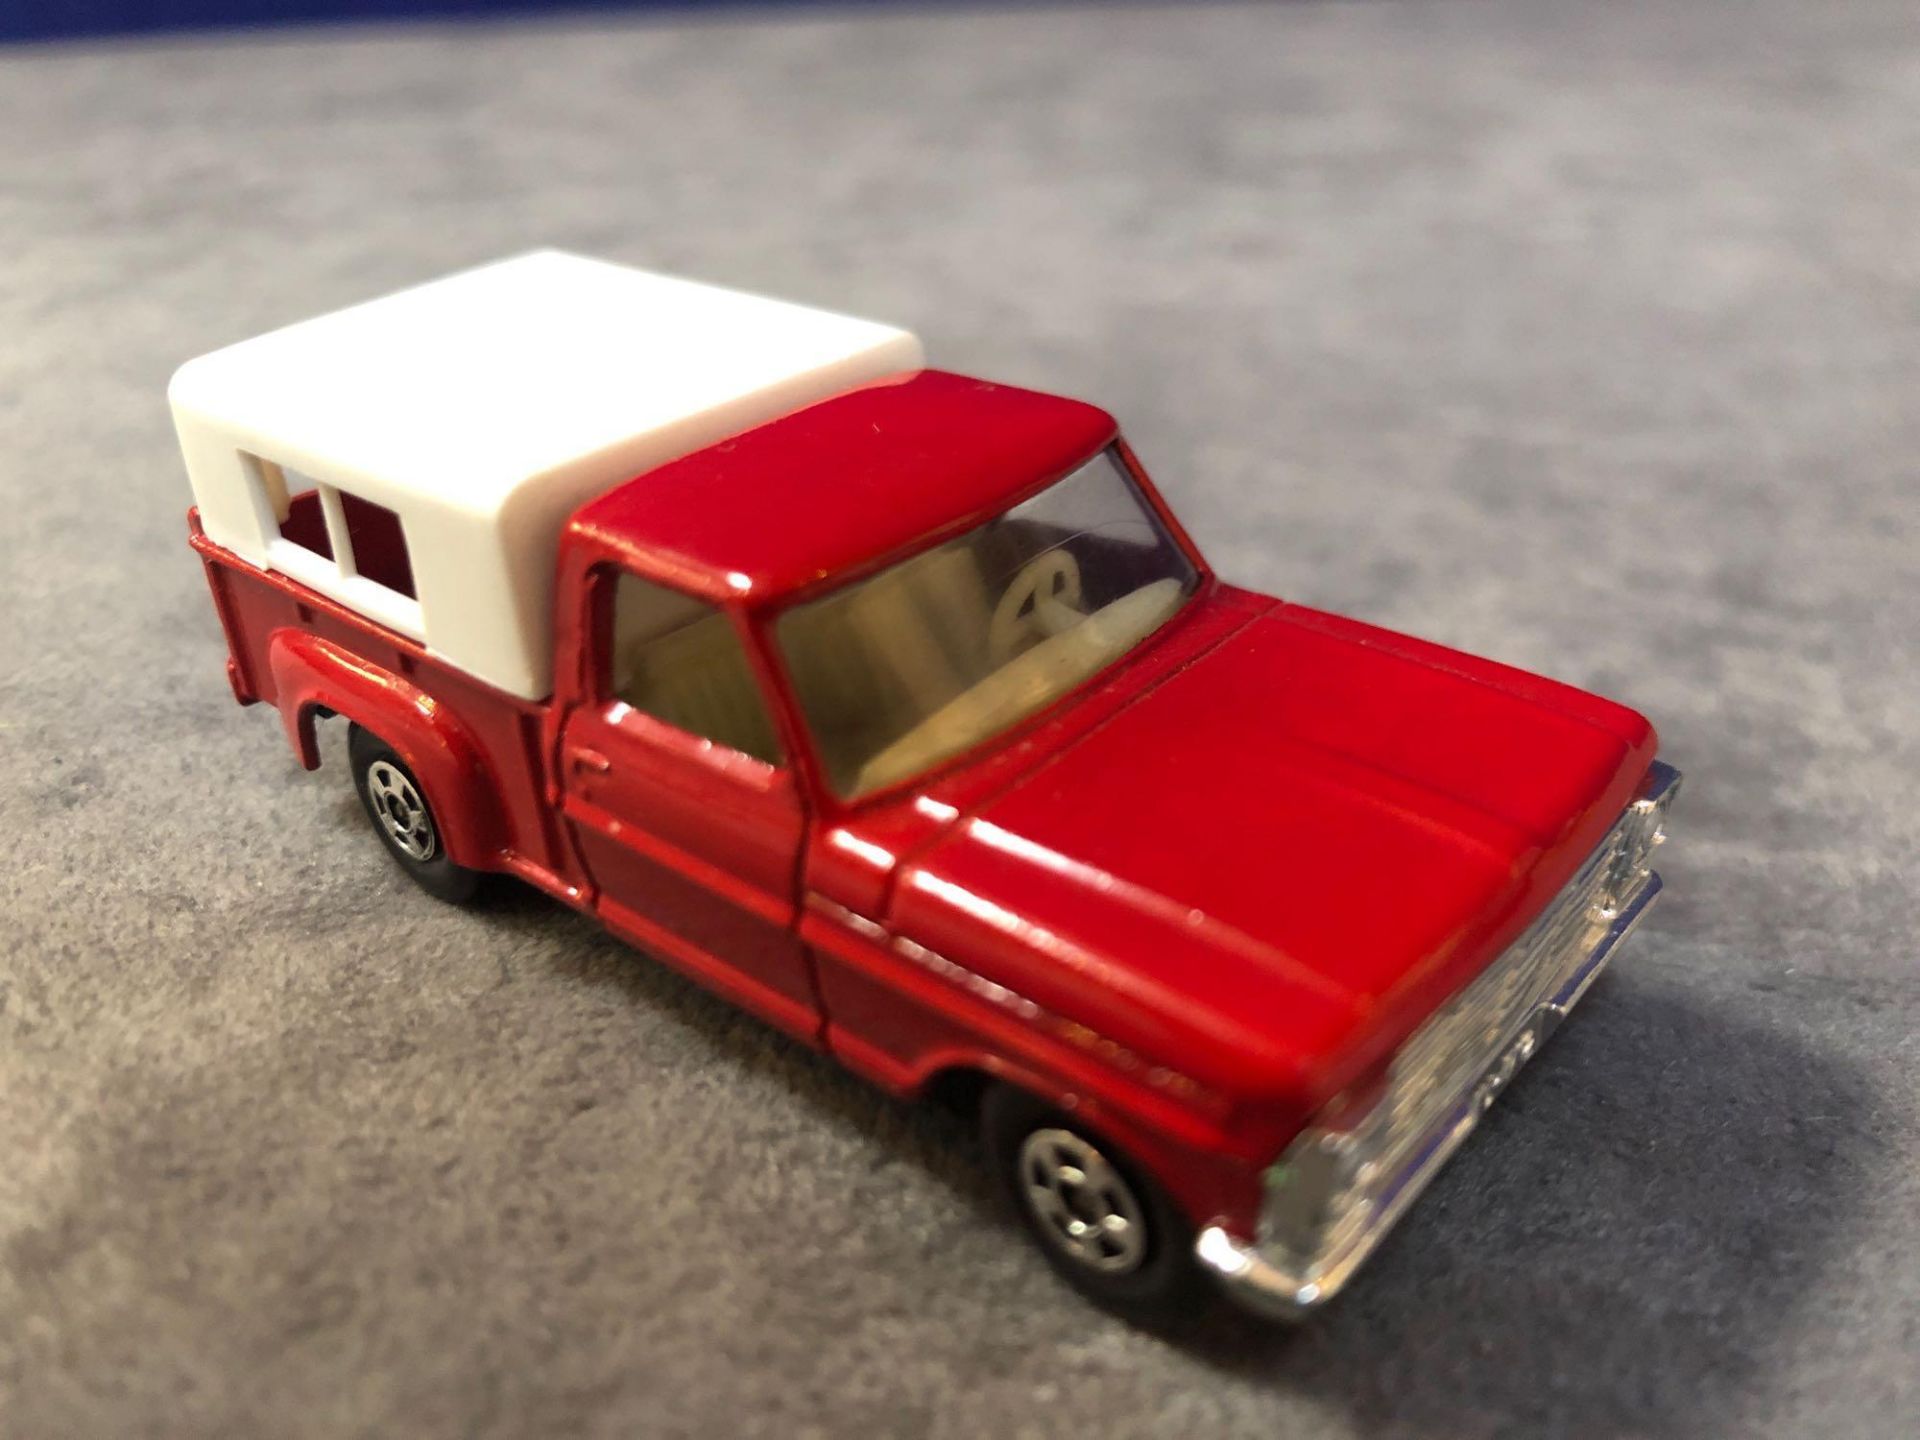 Matchbox Superfast Diecast #6 Ford Pickup Truck Rarer Green Base Mint Superb Paint With Firm Box - Image 2 of 4